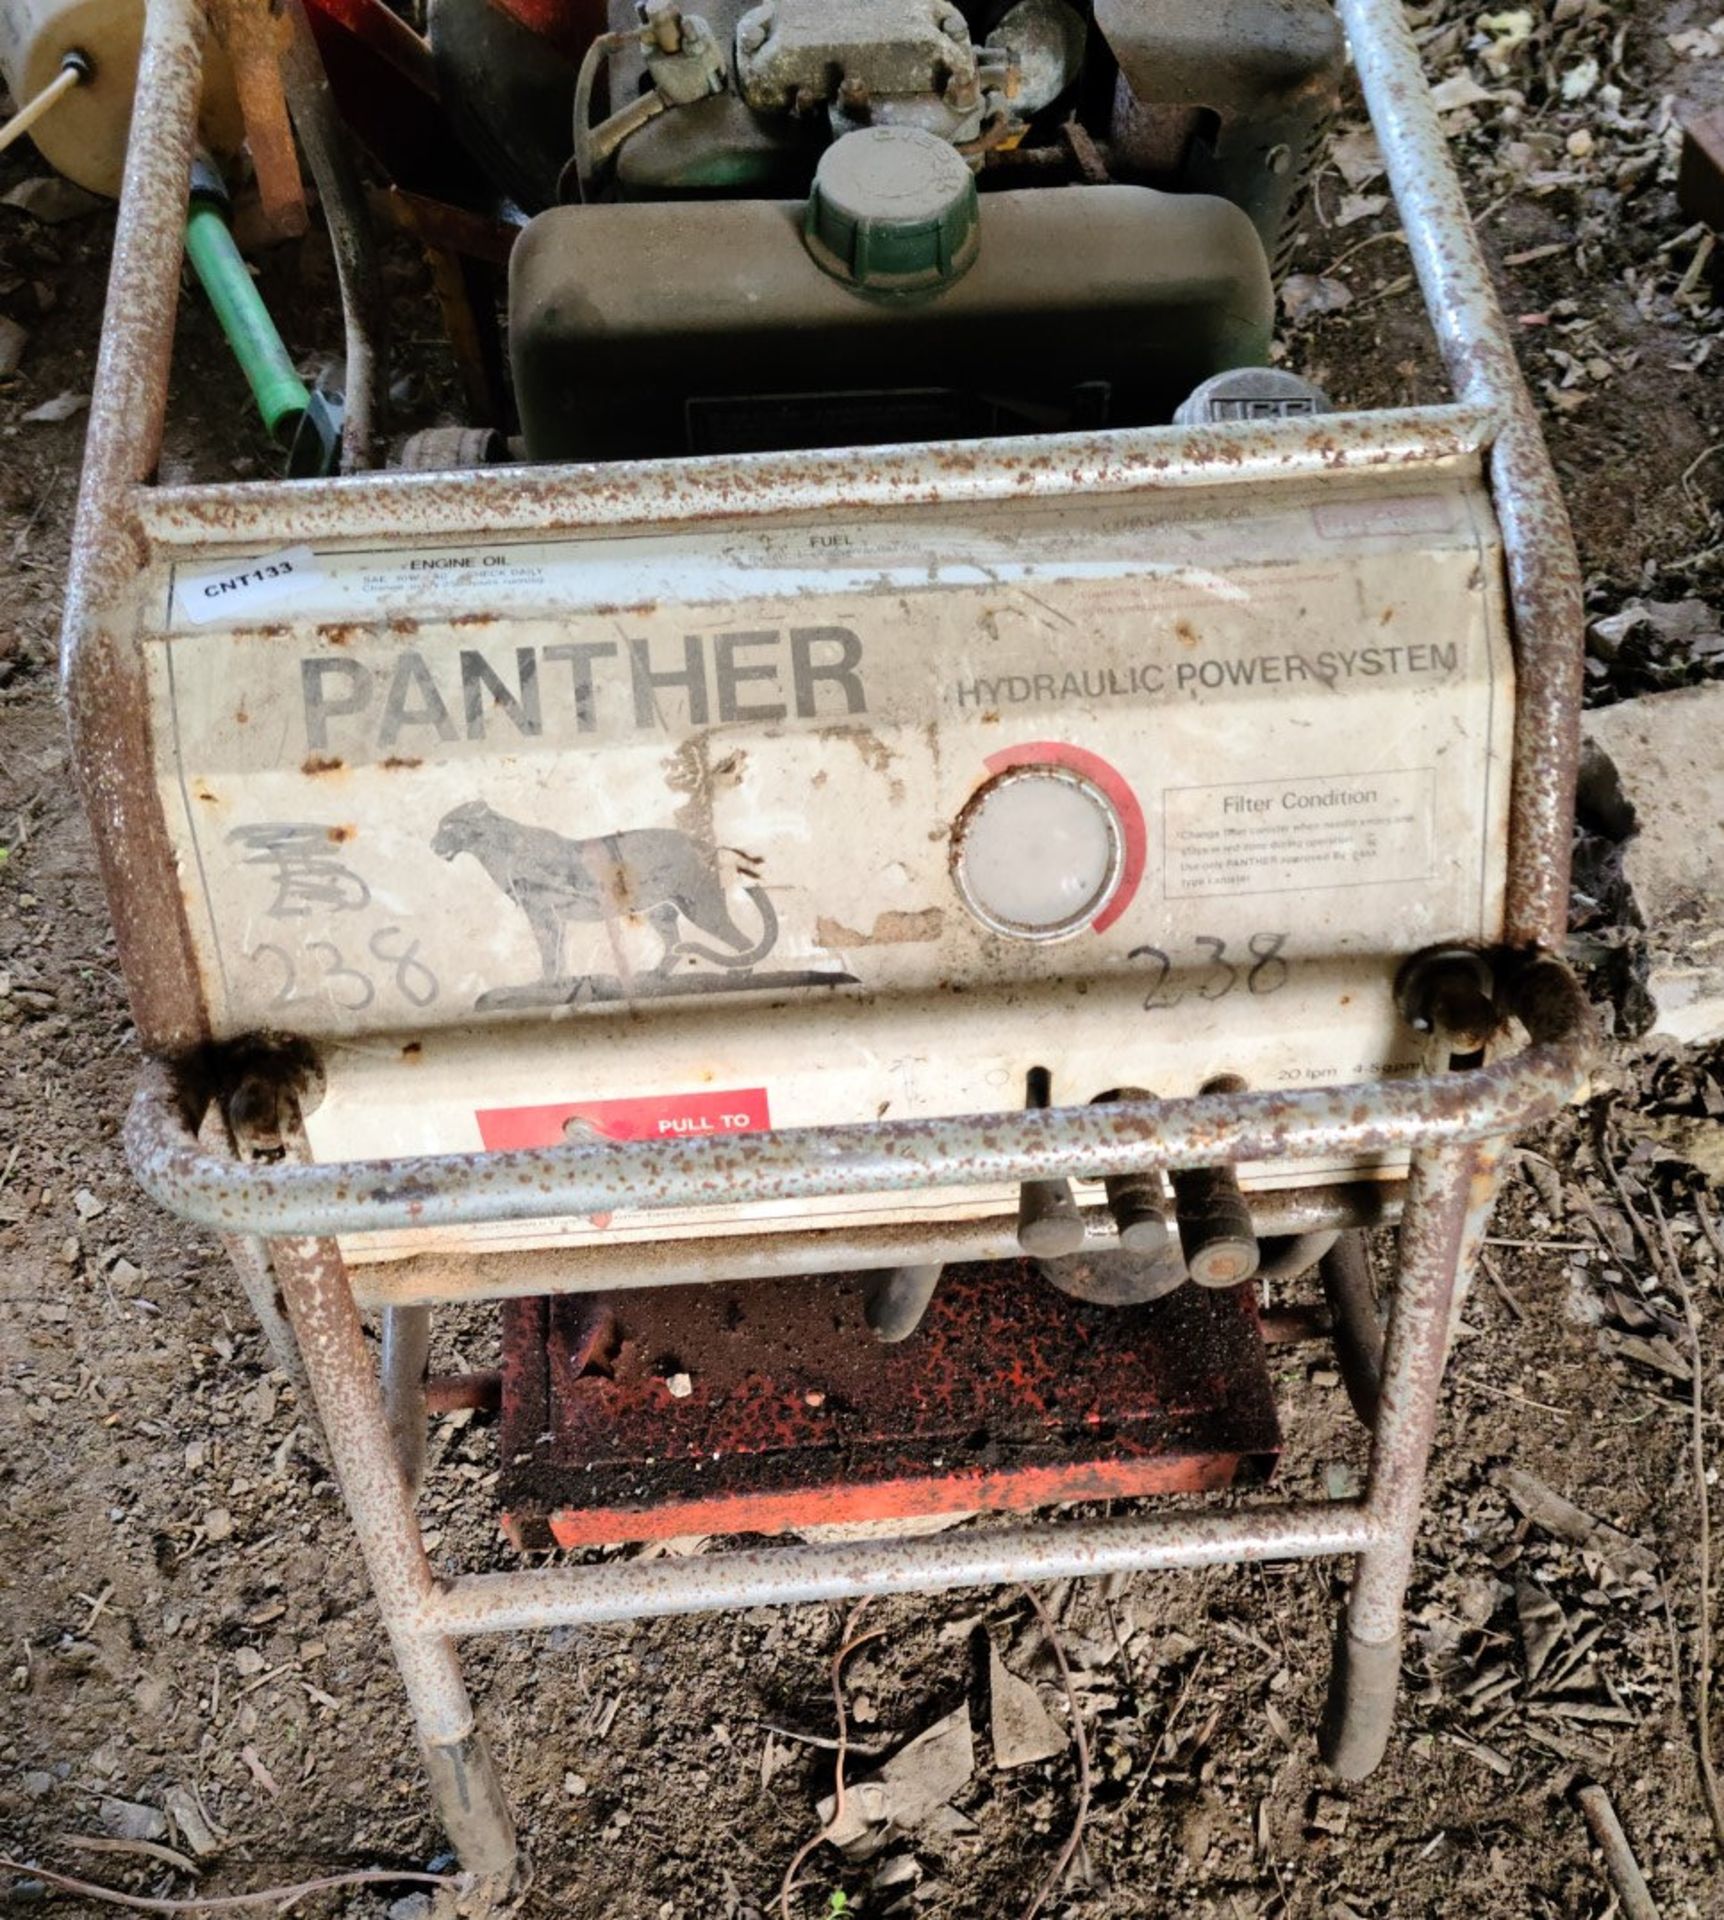 1 x Panther Hydraulic Power System - Ref: CNT133 - CL846 - Location: Oxford OX2This lot is from a